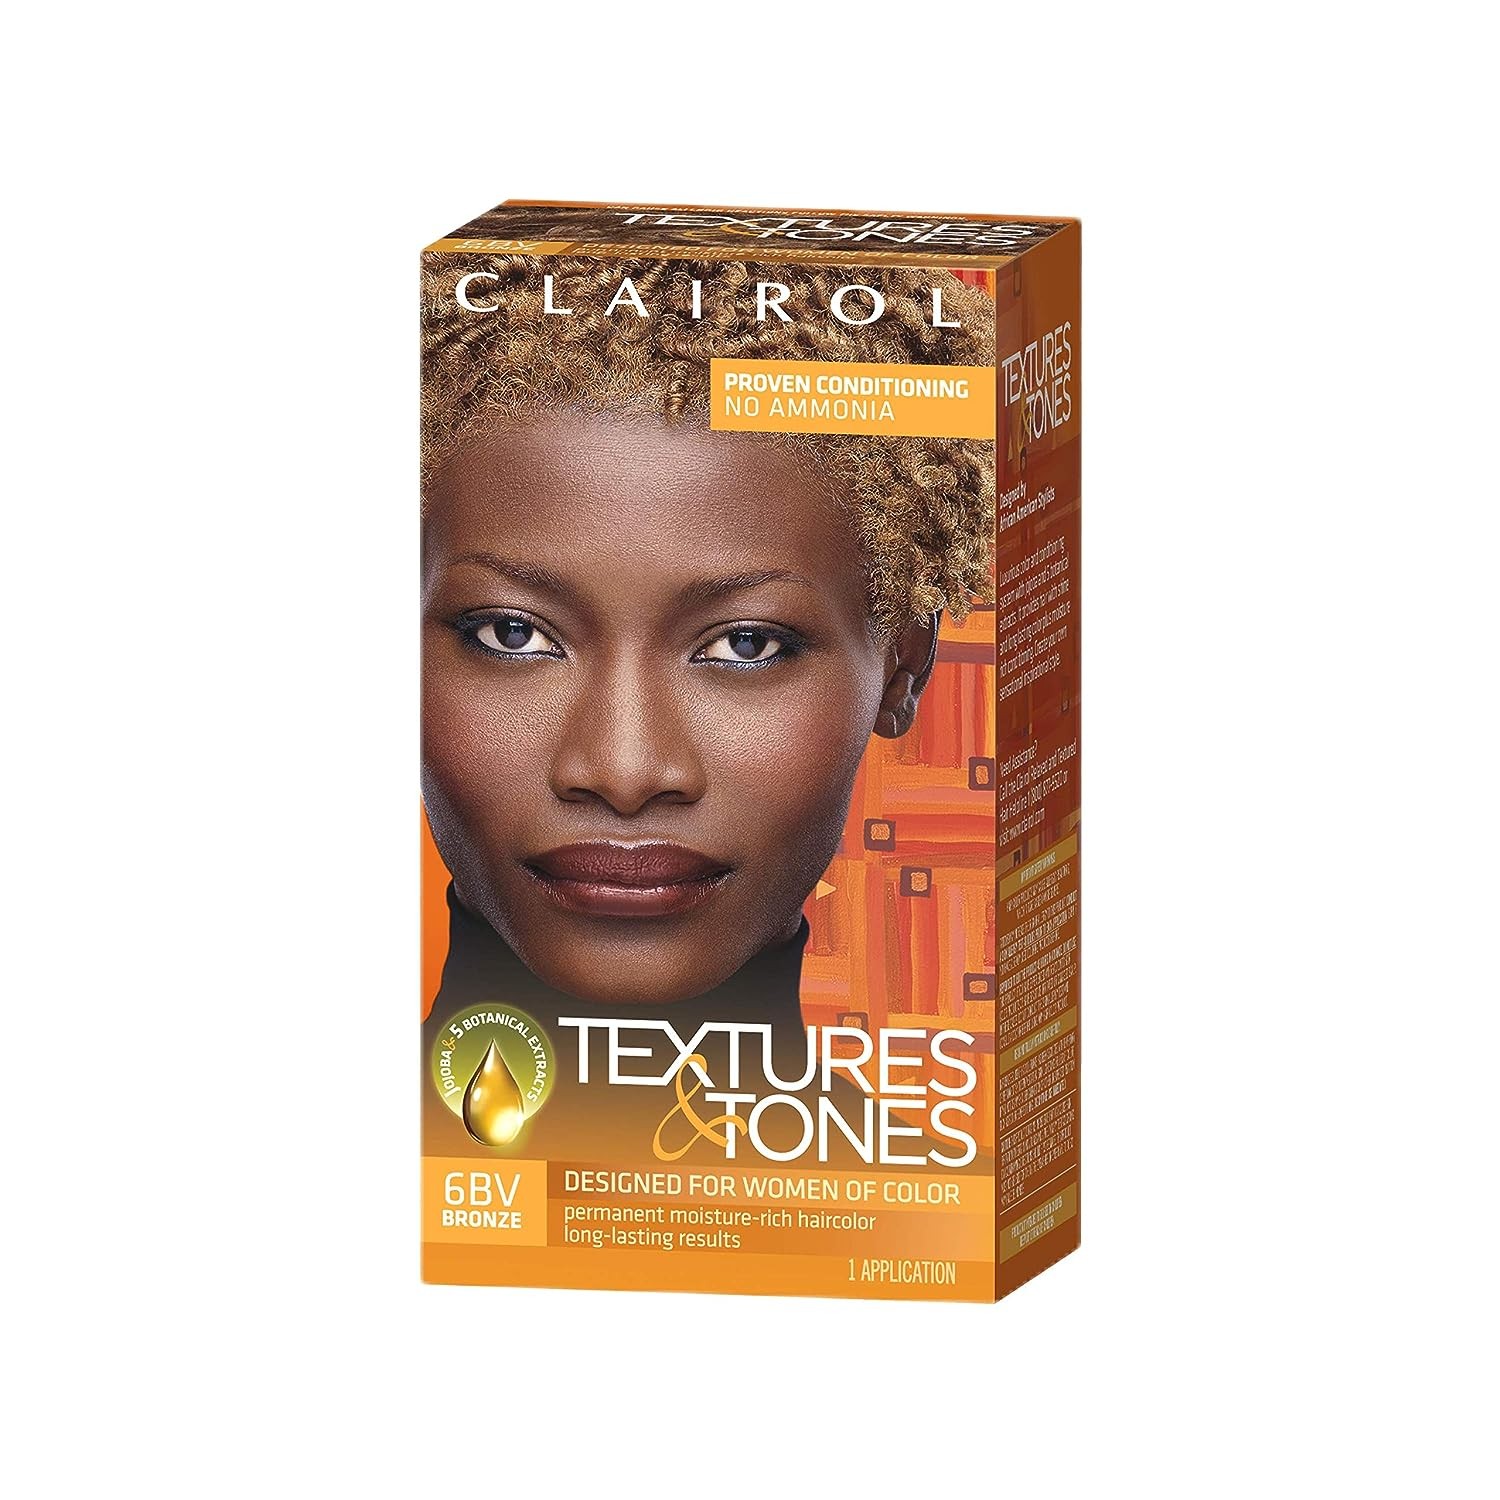 Clairol Professional Textures and Tones Permanent Hair Color, Bronze    Clairol Professional Textures and Tones Permanent Hair Color, Bronze